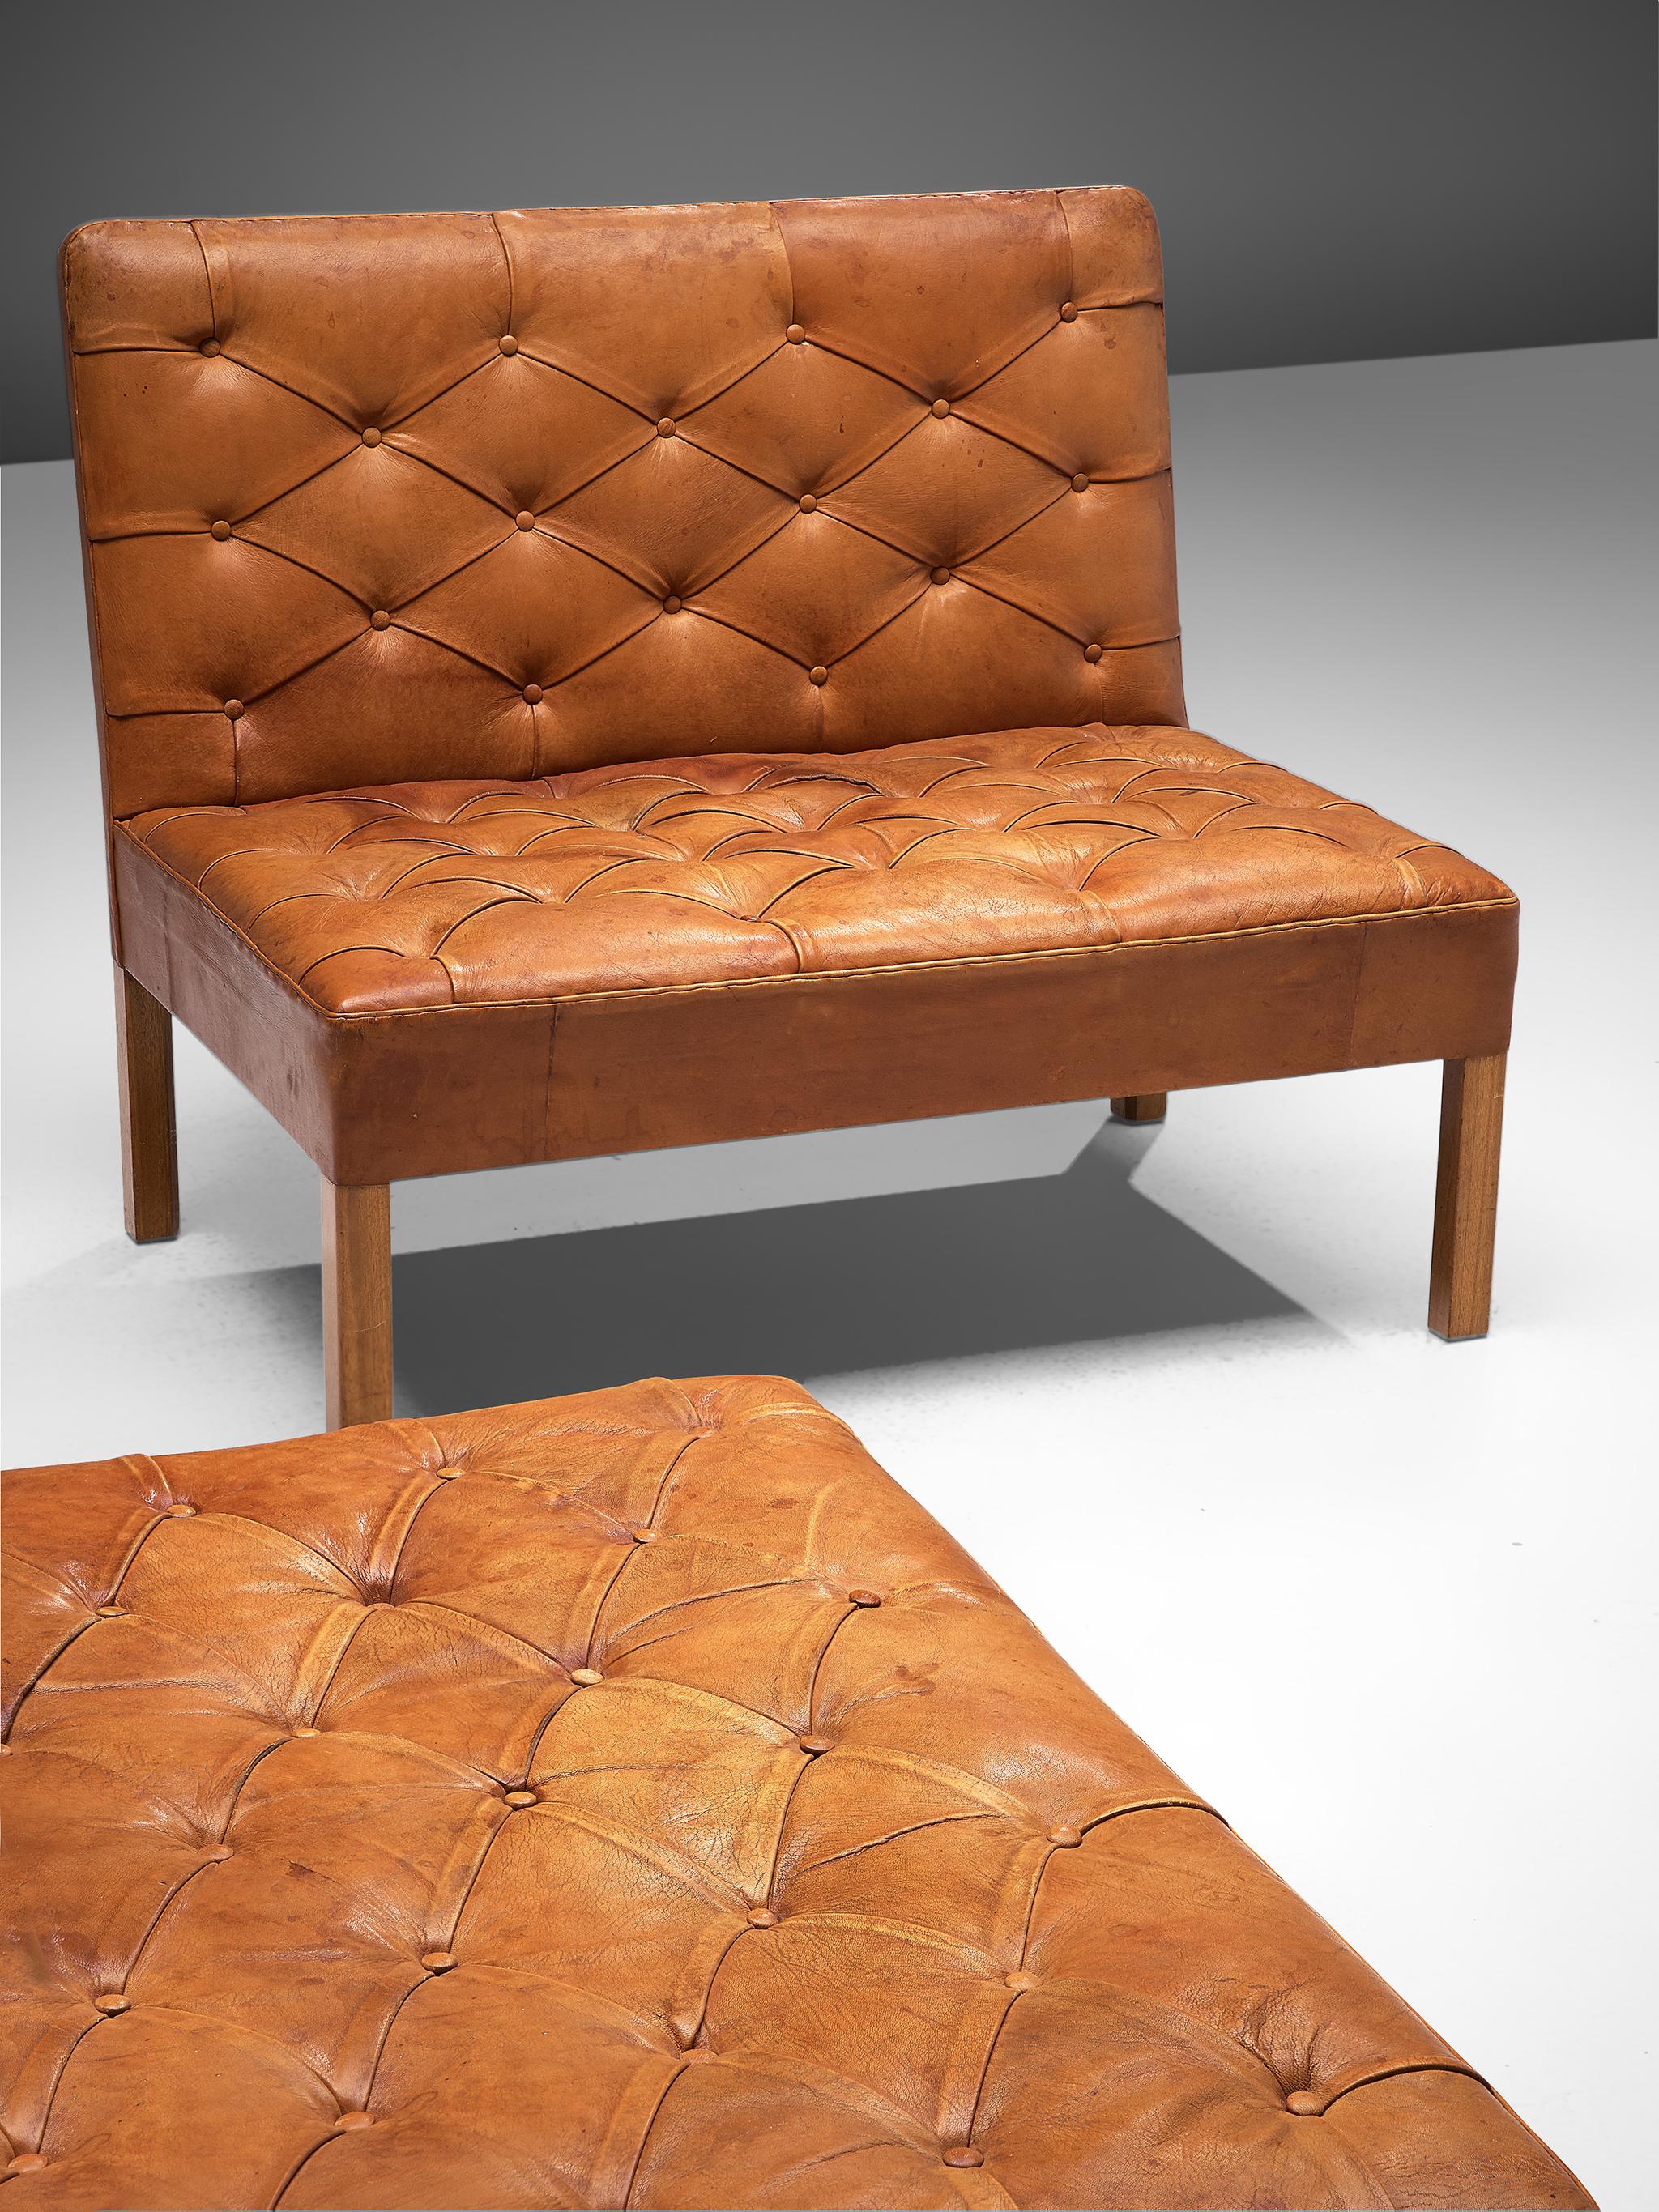 Late 20th Century Kaare Klint 'Addition' Sofa's in Original Patinated Cognac Leather